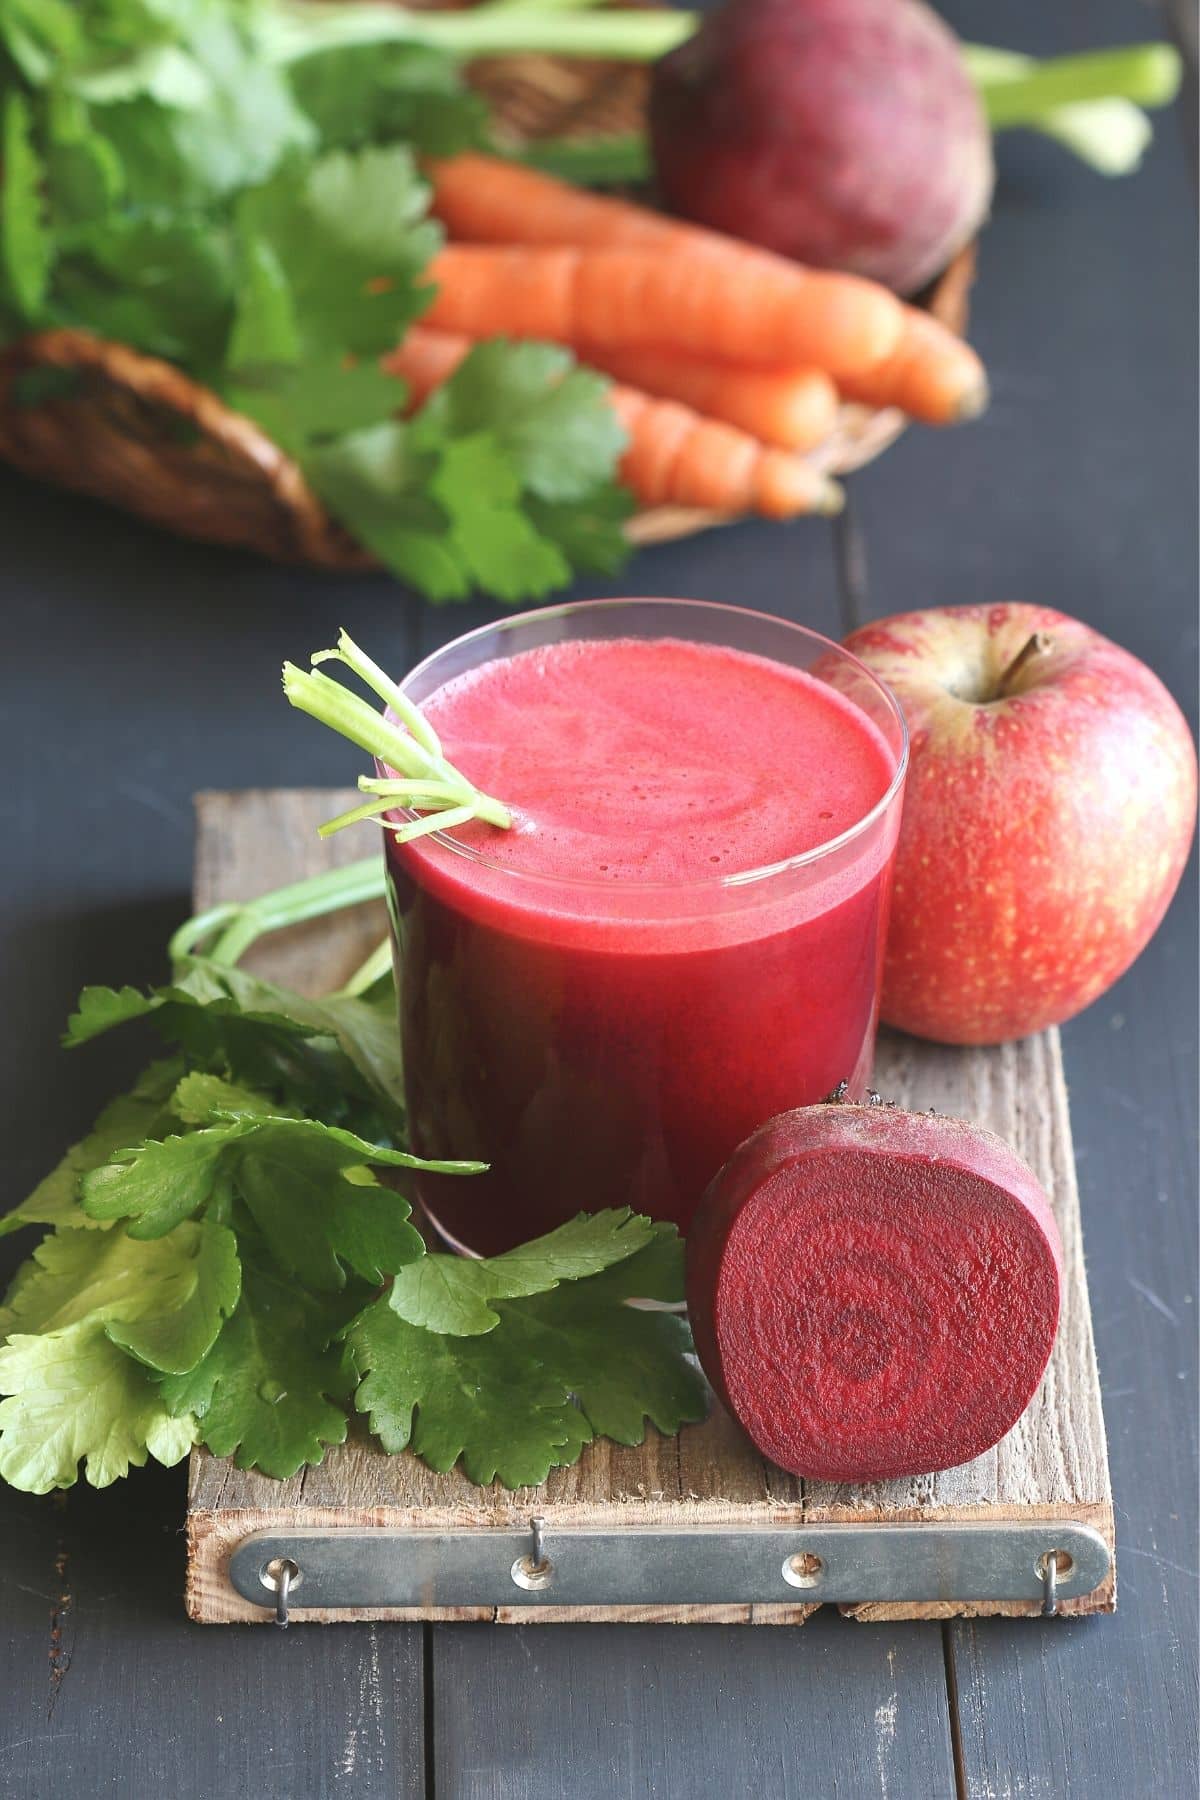 beet juice made with apples and carrots